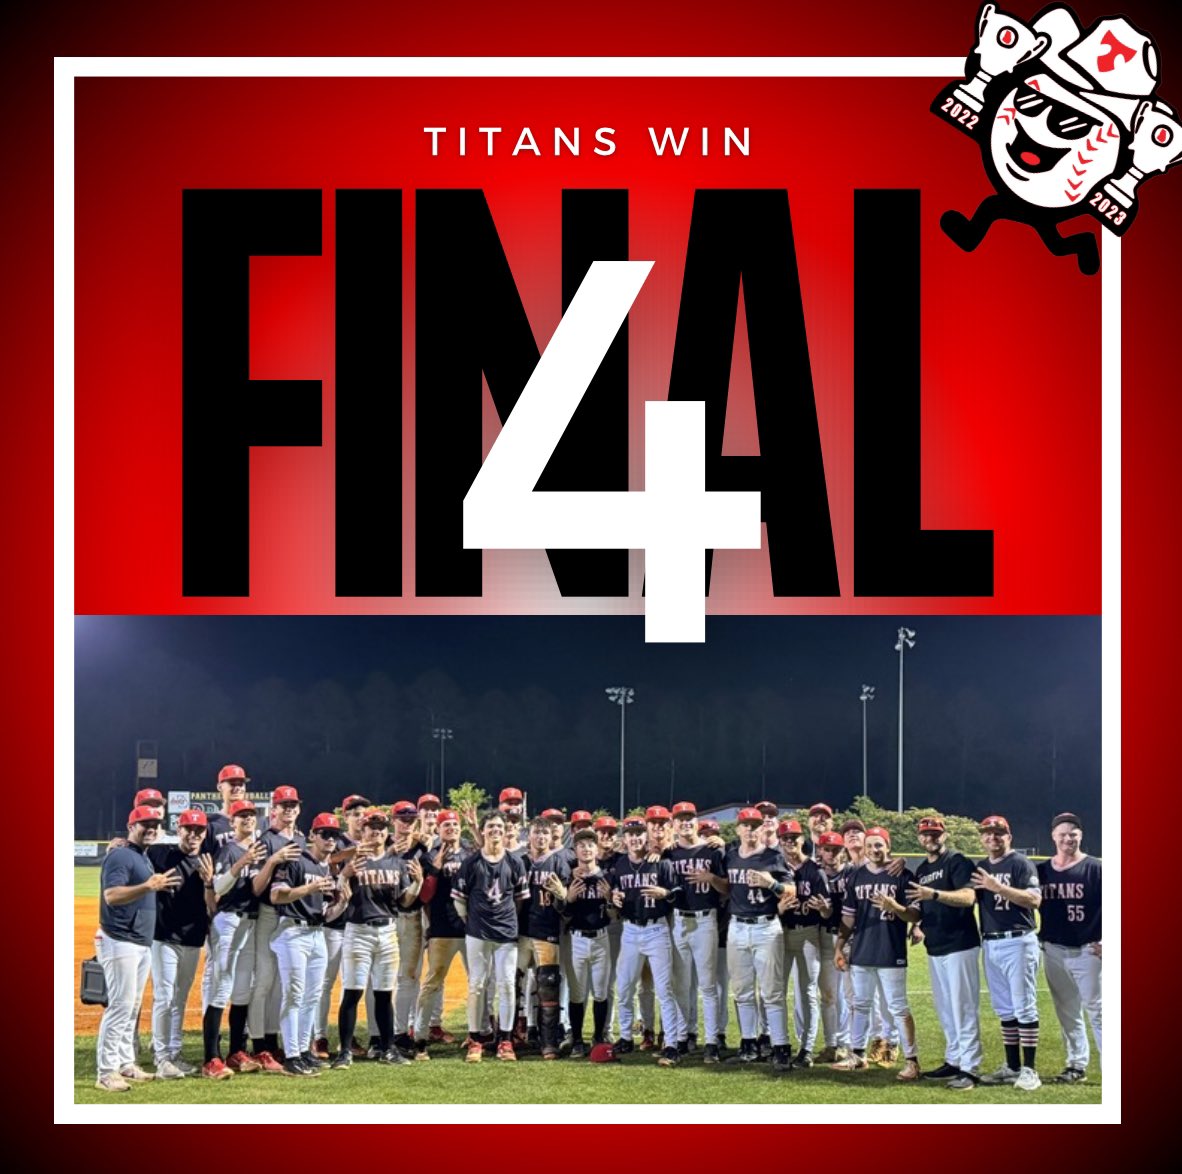 Titans take two in Perry and are headed to the Final Four. 🆚 @ Starr’s Mill 📆 Saturday, May 11th ⏰ Game 1: 3pm / Game 2: 5pm #BuiltDifferent #Team44 #3peat